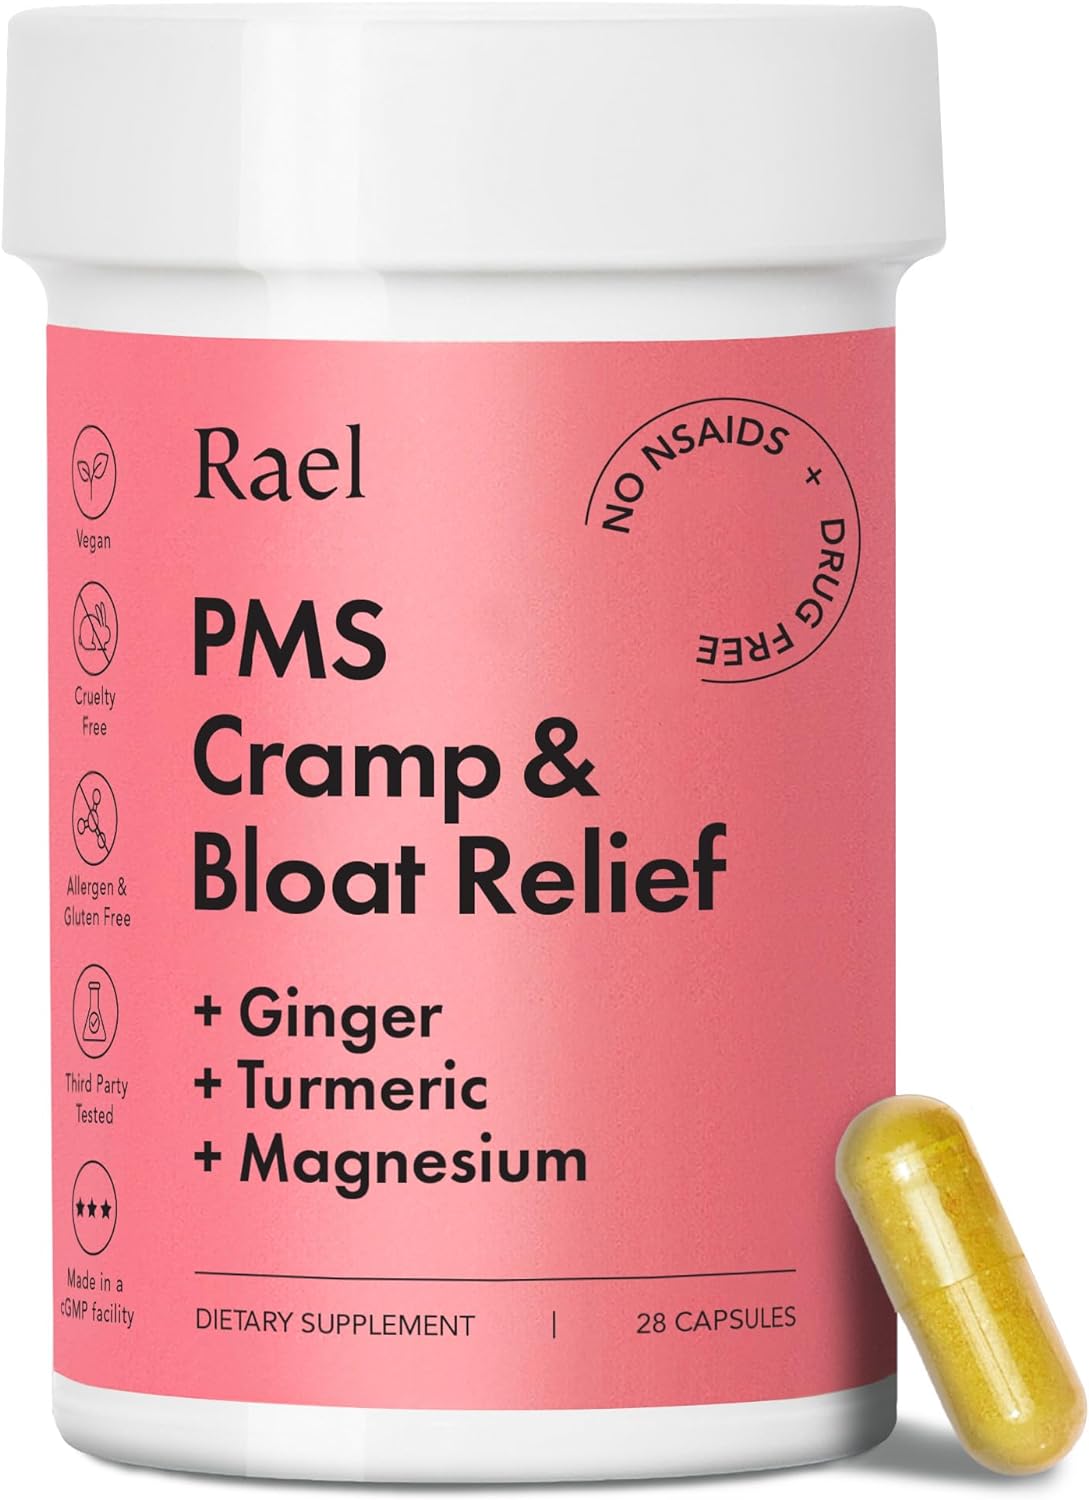 Rael PMS Supplement - Hormone Balance for Women, PMS Relief, Menstrual Cramps, Period Bloating, Mood Swings Treatment with Turmeric, Ginger, Magnesium, No NSAIDs, Vegan (28 Capsules)